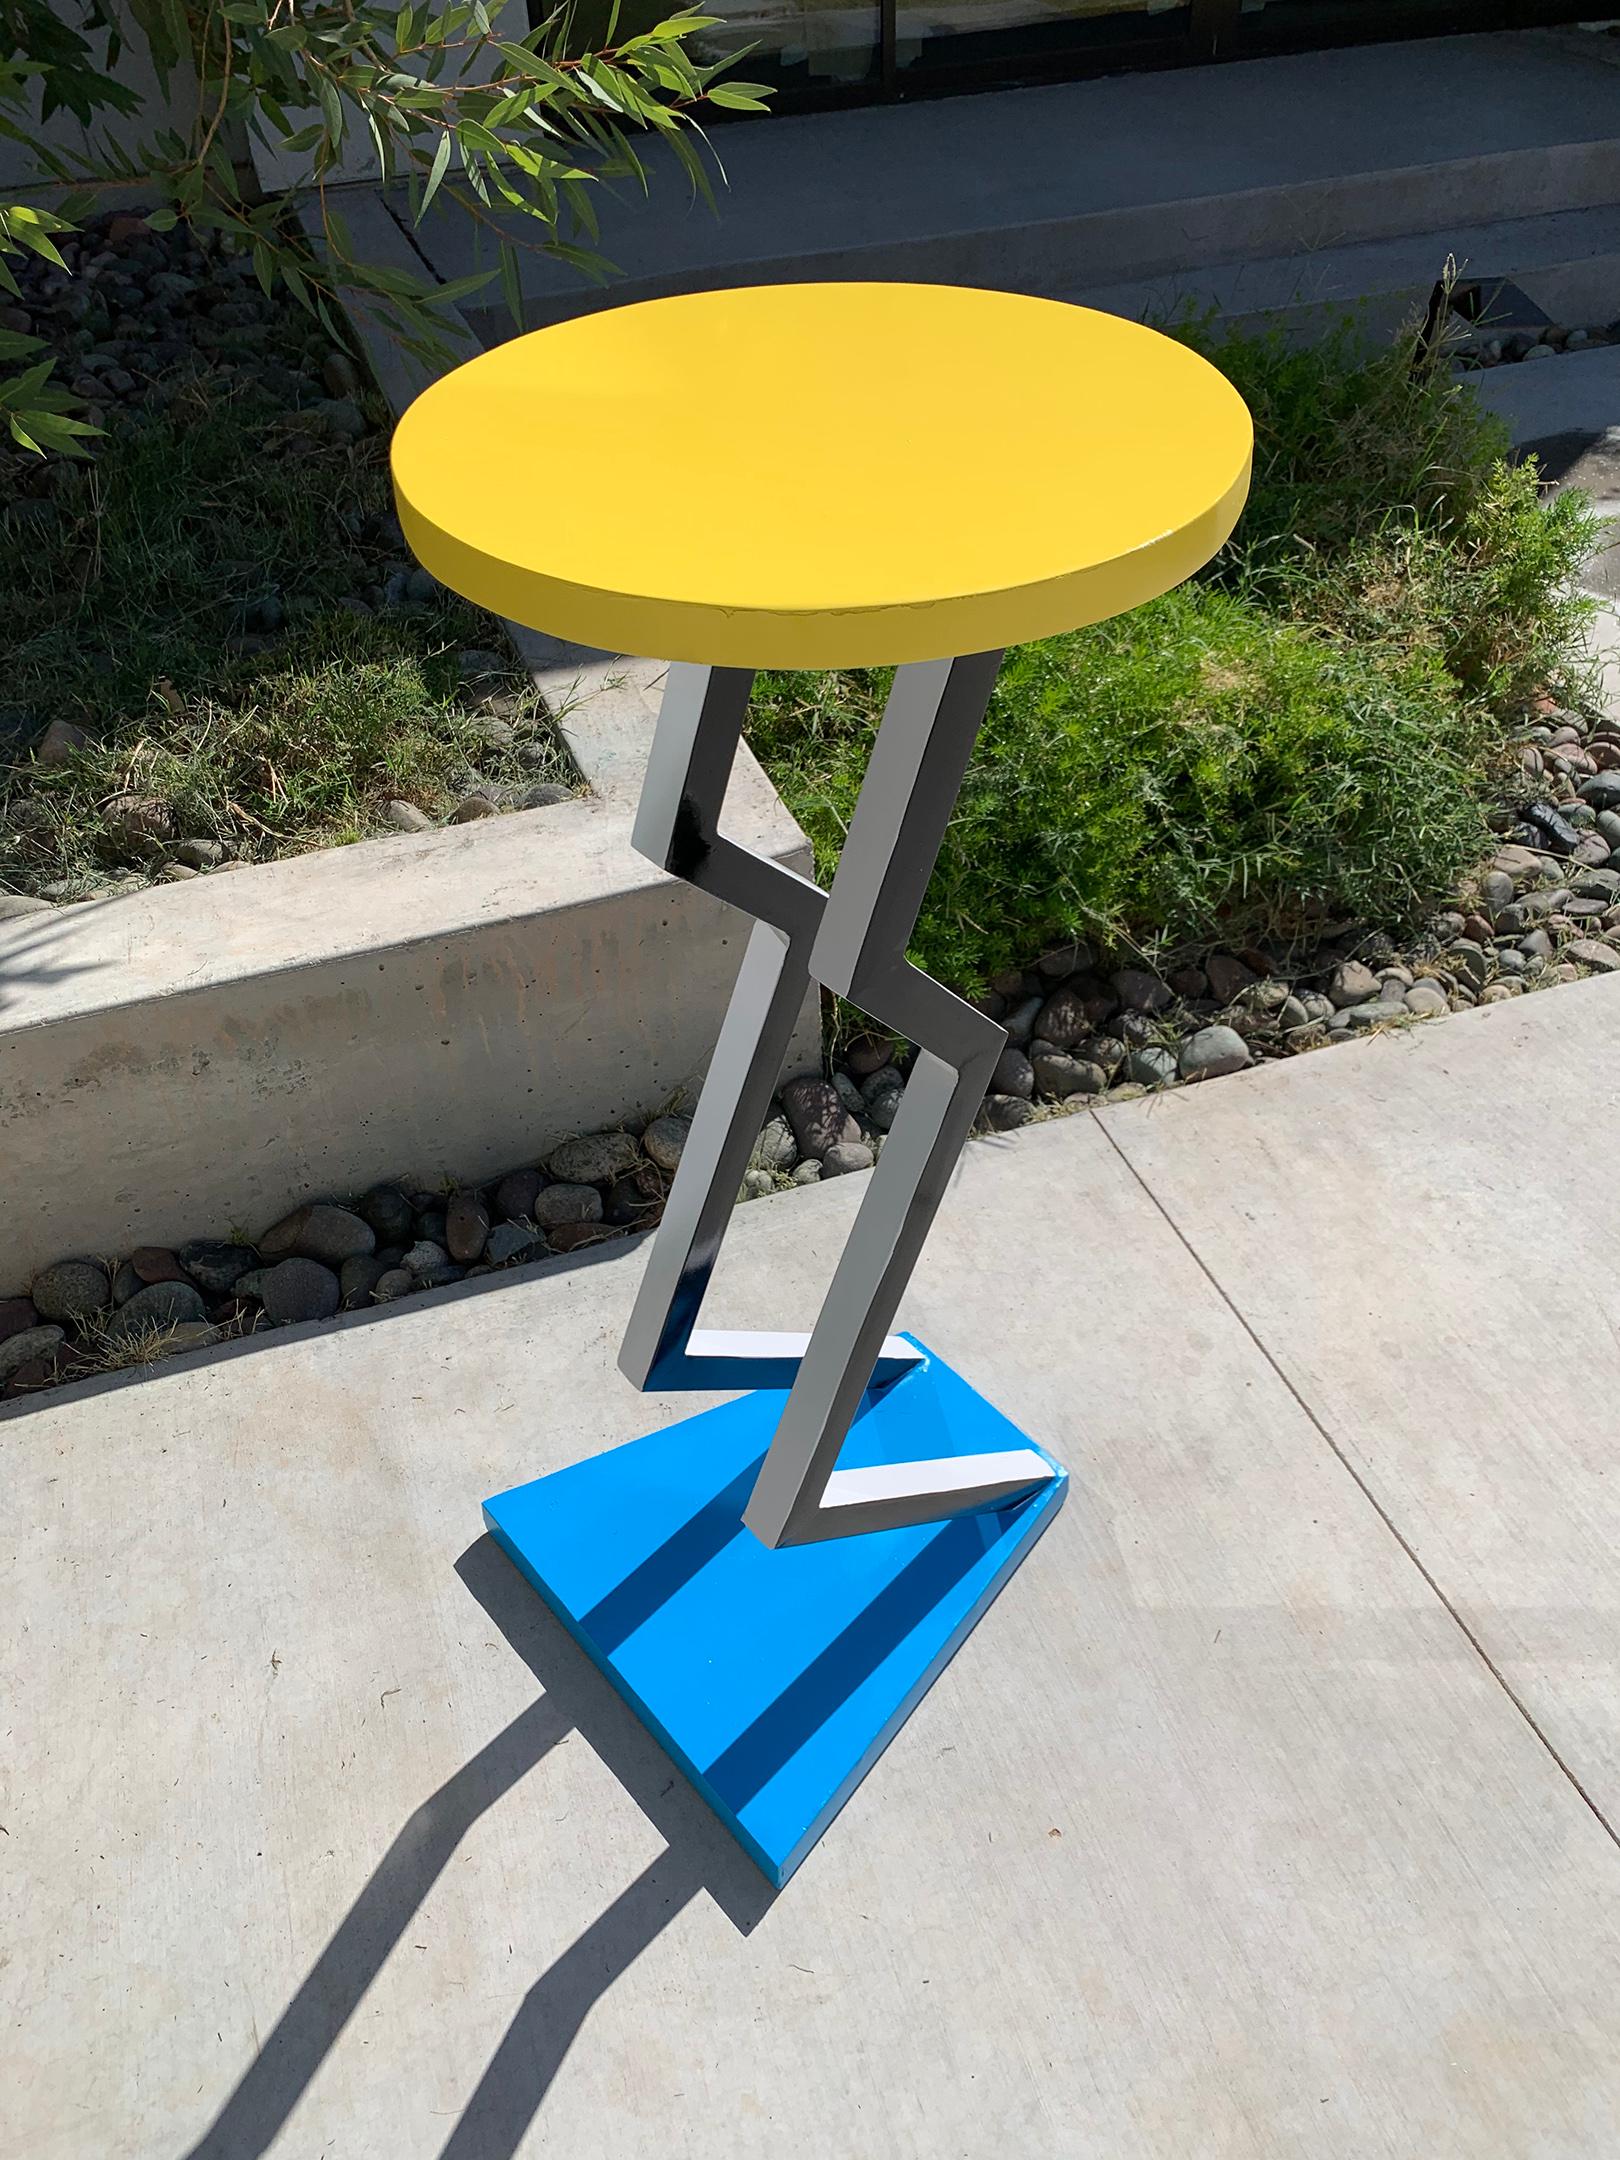 This table is absolutely stunning! A true conversation piece, this 1990s table is in the style of Memphis Milano and features bright pops of yellow and blue with black and white zig-zag legs.

A fantastic table or pedestal accent piece for any